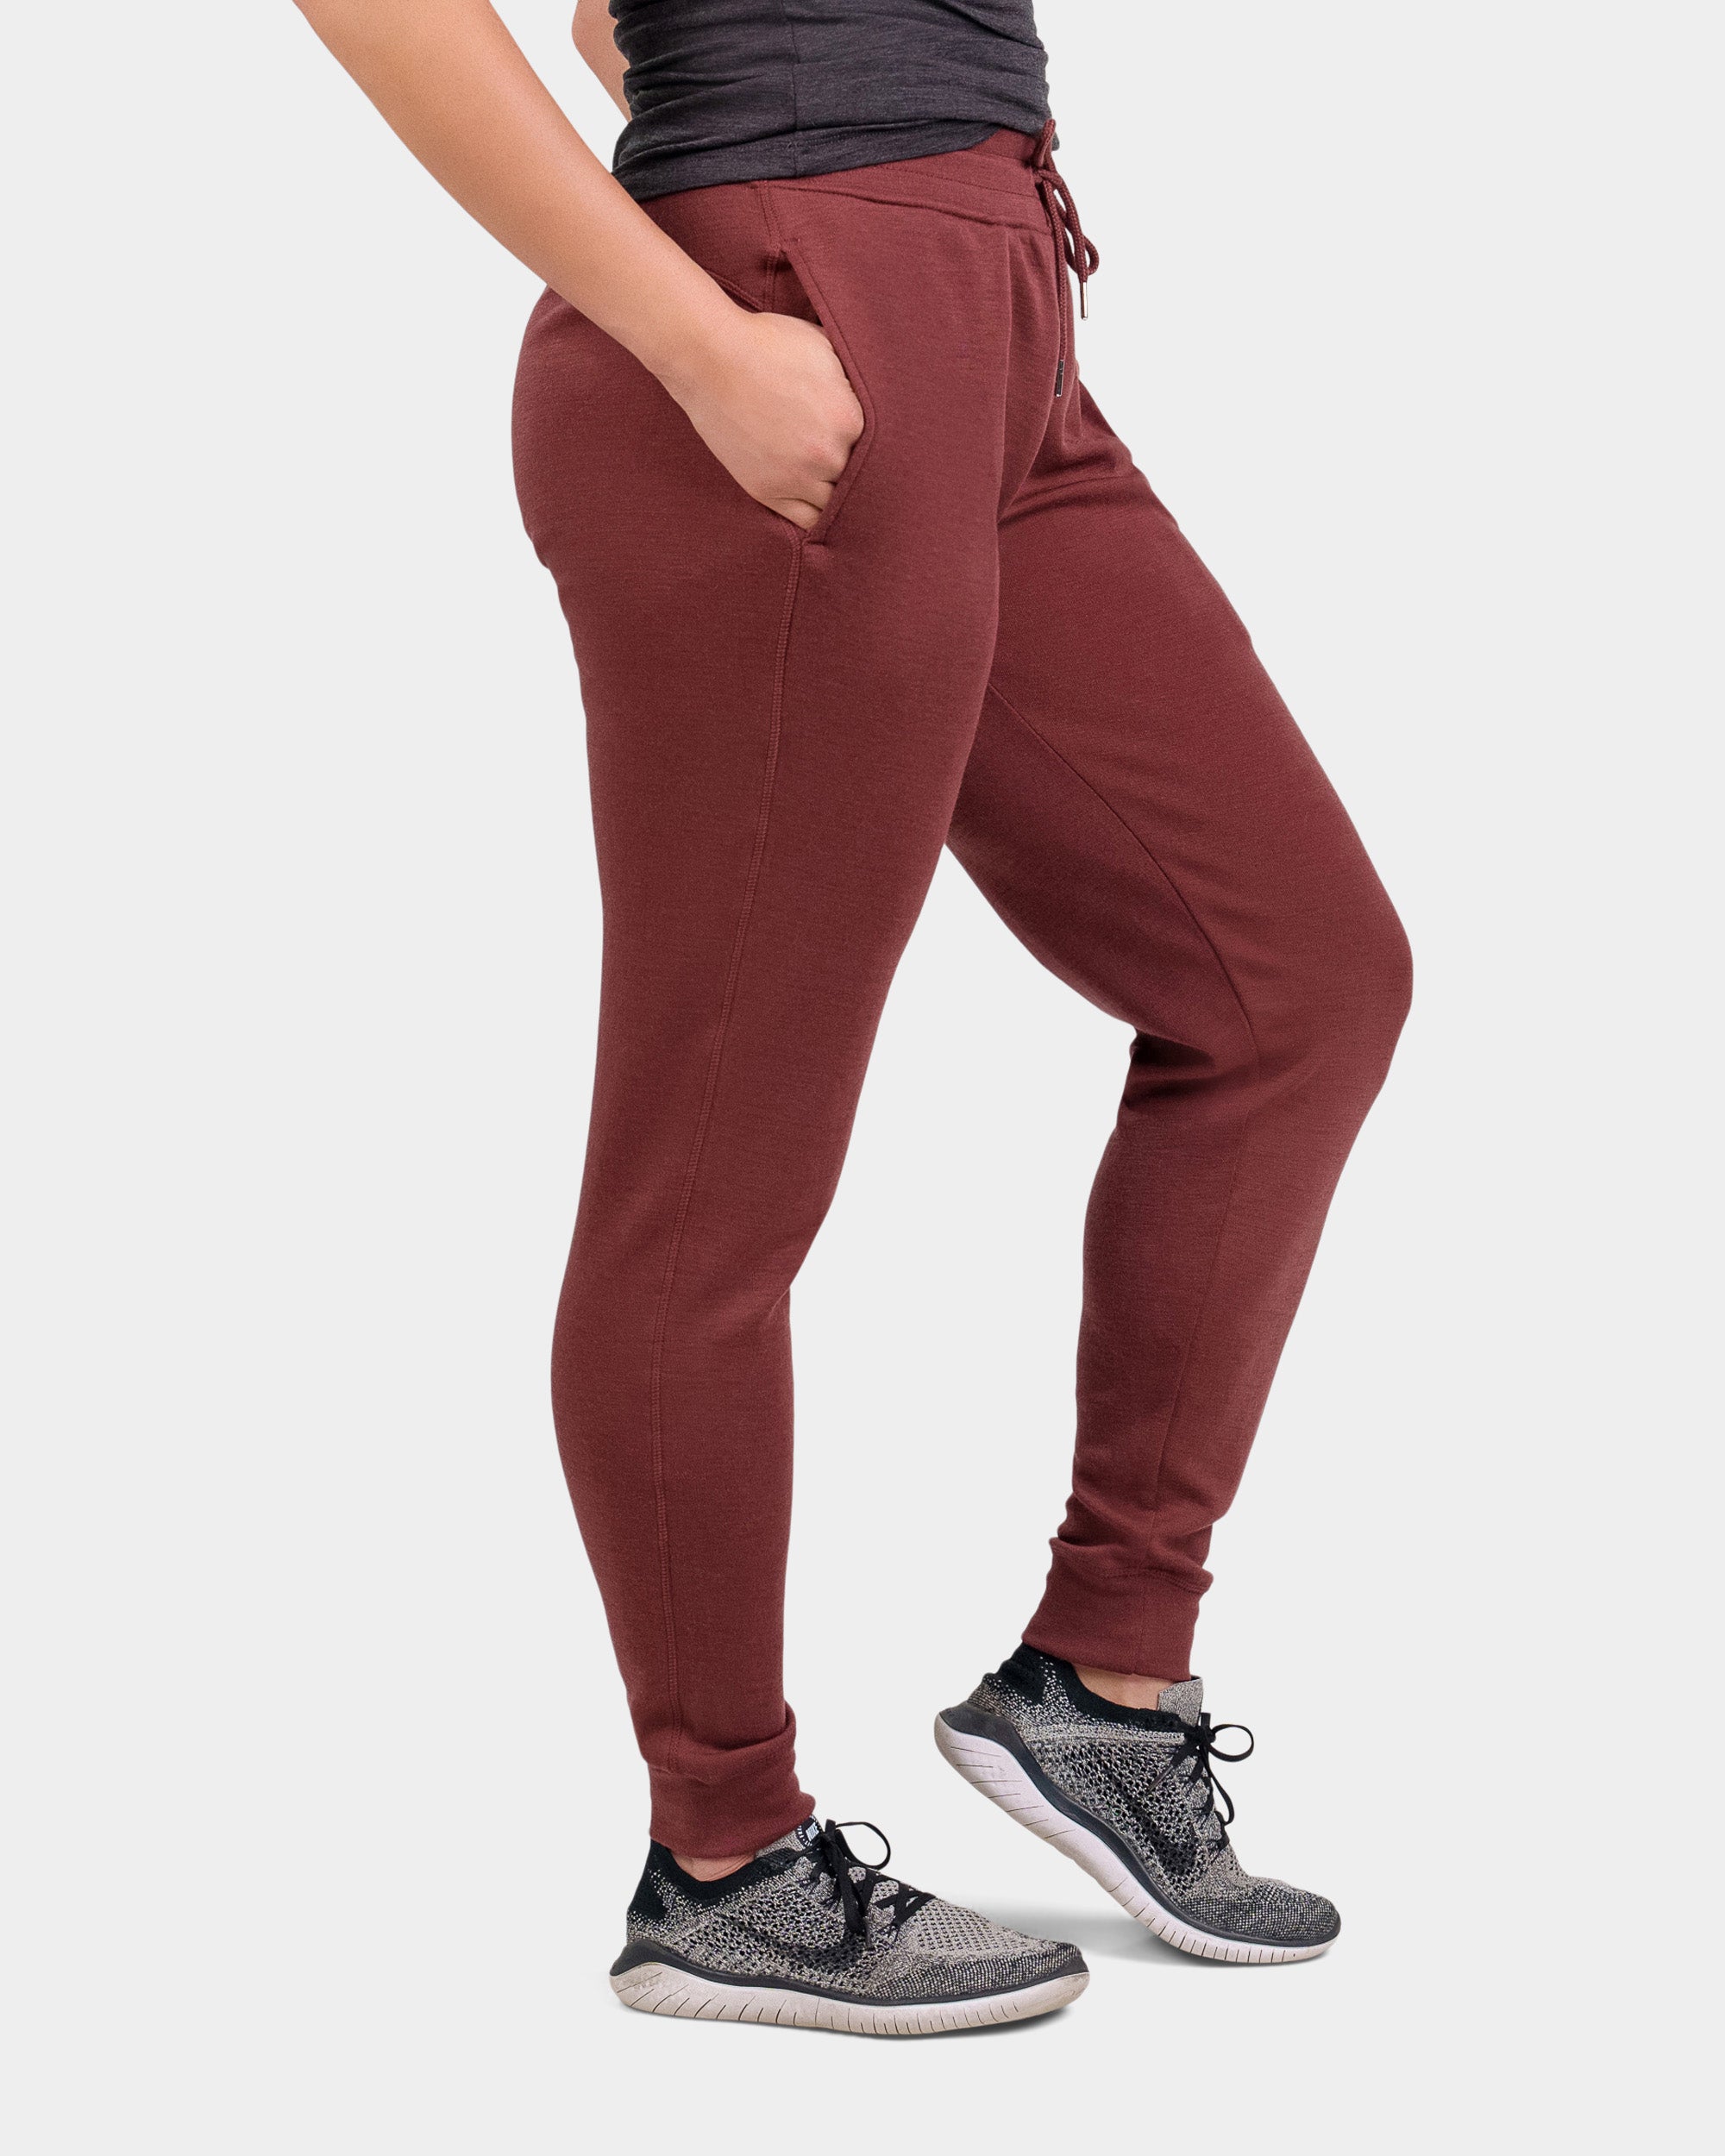 Buy Kissero Cotton Fit Solid Women's Solid Red Stripe with Black Track Pant  women's Cotton Track Pants,Joggers, Gym, Active WearLower, Yoga Online at  Best Prices in India - JioMart.